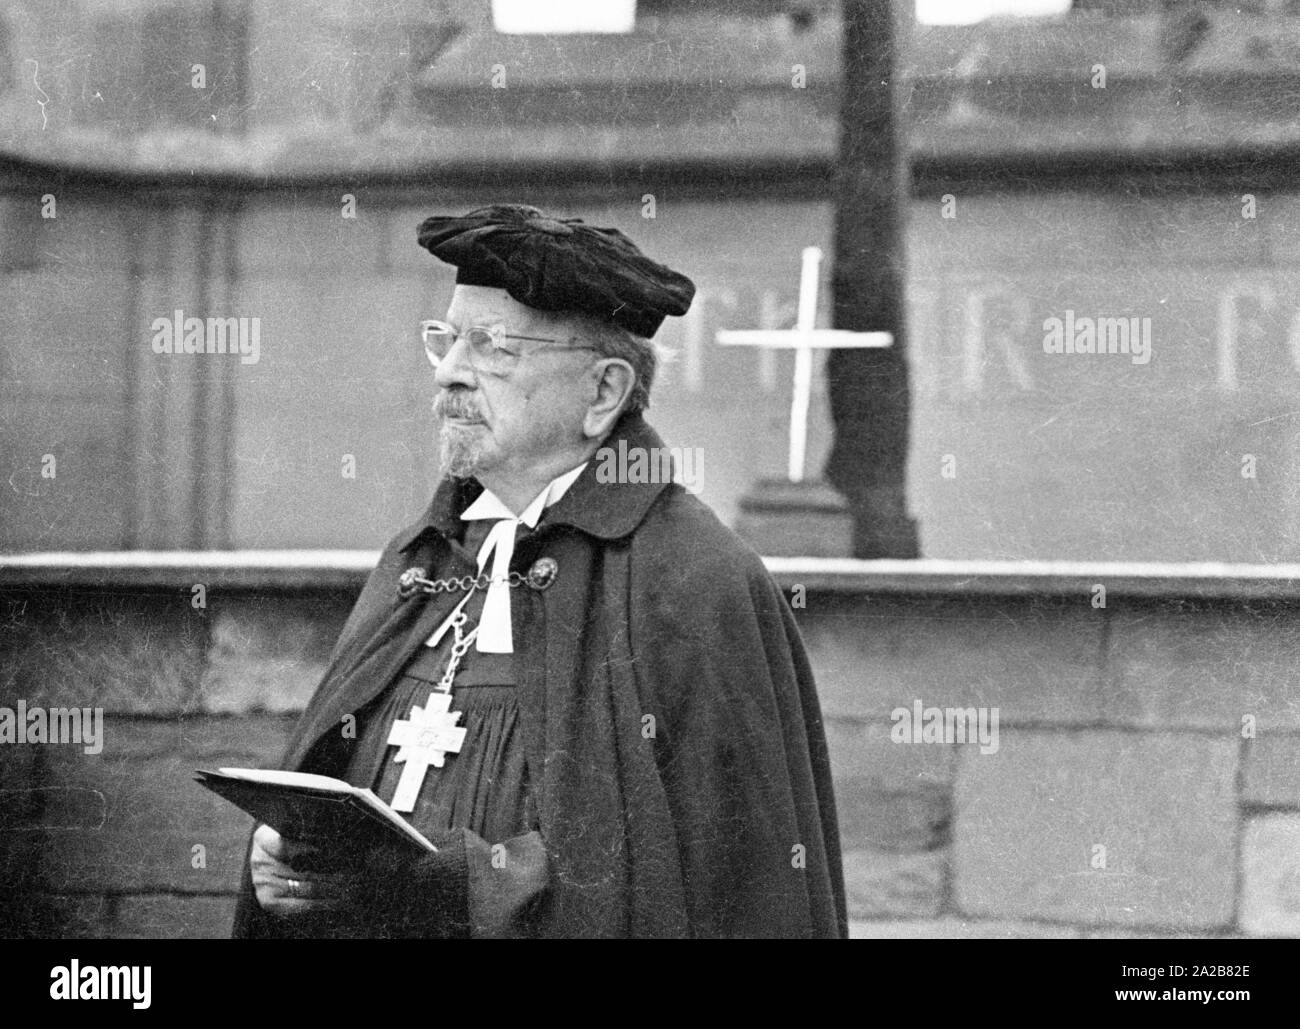 The German bishop, Otto Dibelius, participates at the groundbreaking ceremony  of the 'International Center for Reconciliation' in the ruin of the destroyed St Michael's Cathedral. Behind him on the altar, the Cross of Nails as a sign of reconciliation. Stock Photo